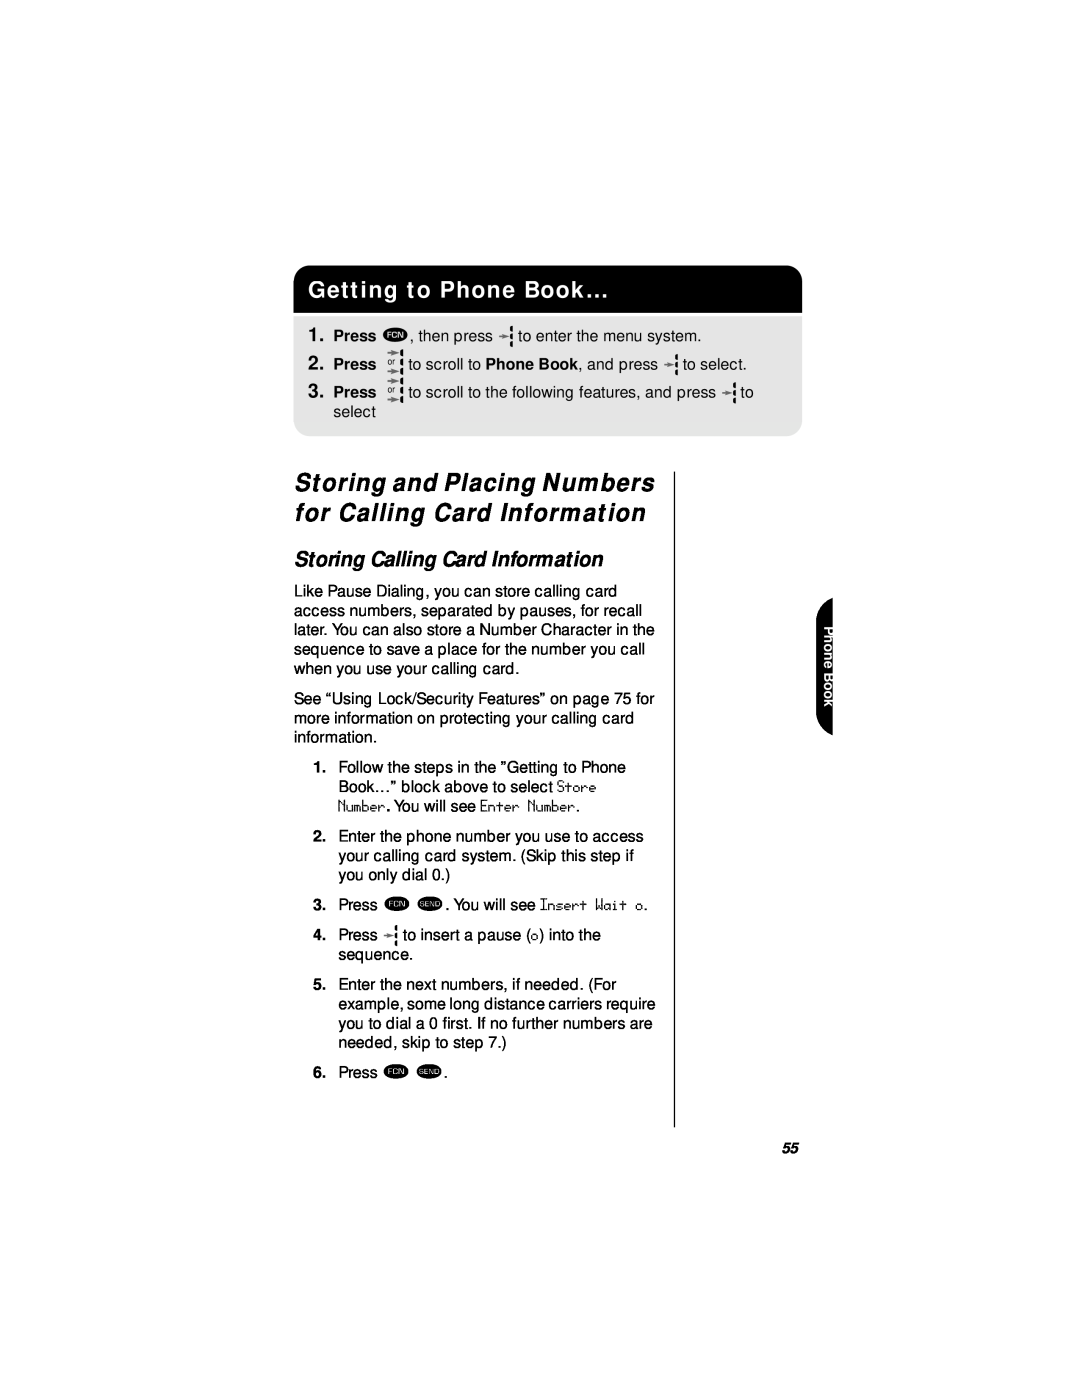 Motorola StarTAC specifications Storing and Placing Numbers for Calling Card Information, Storing Calling Card Information 